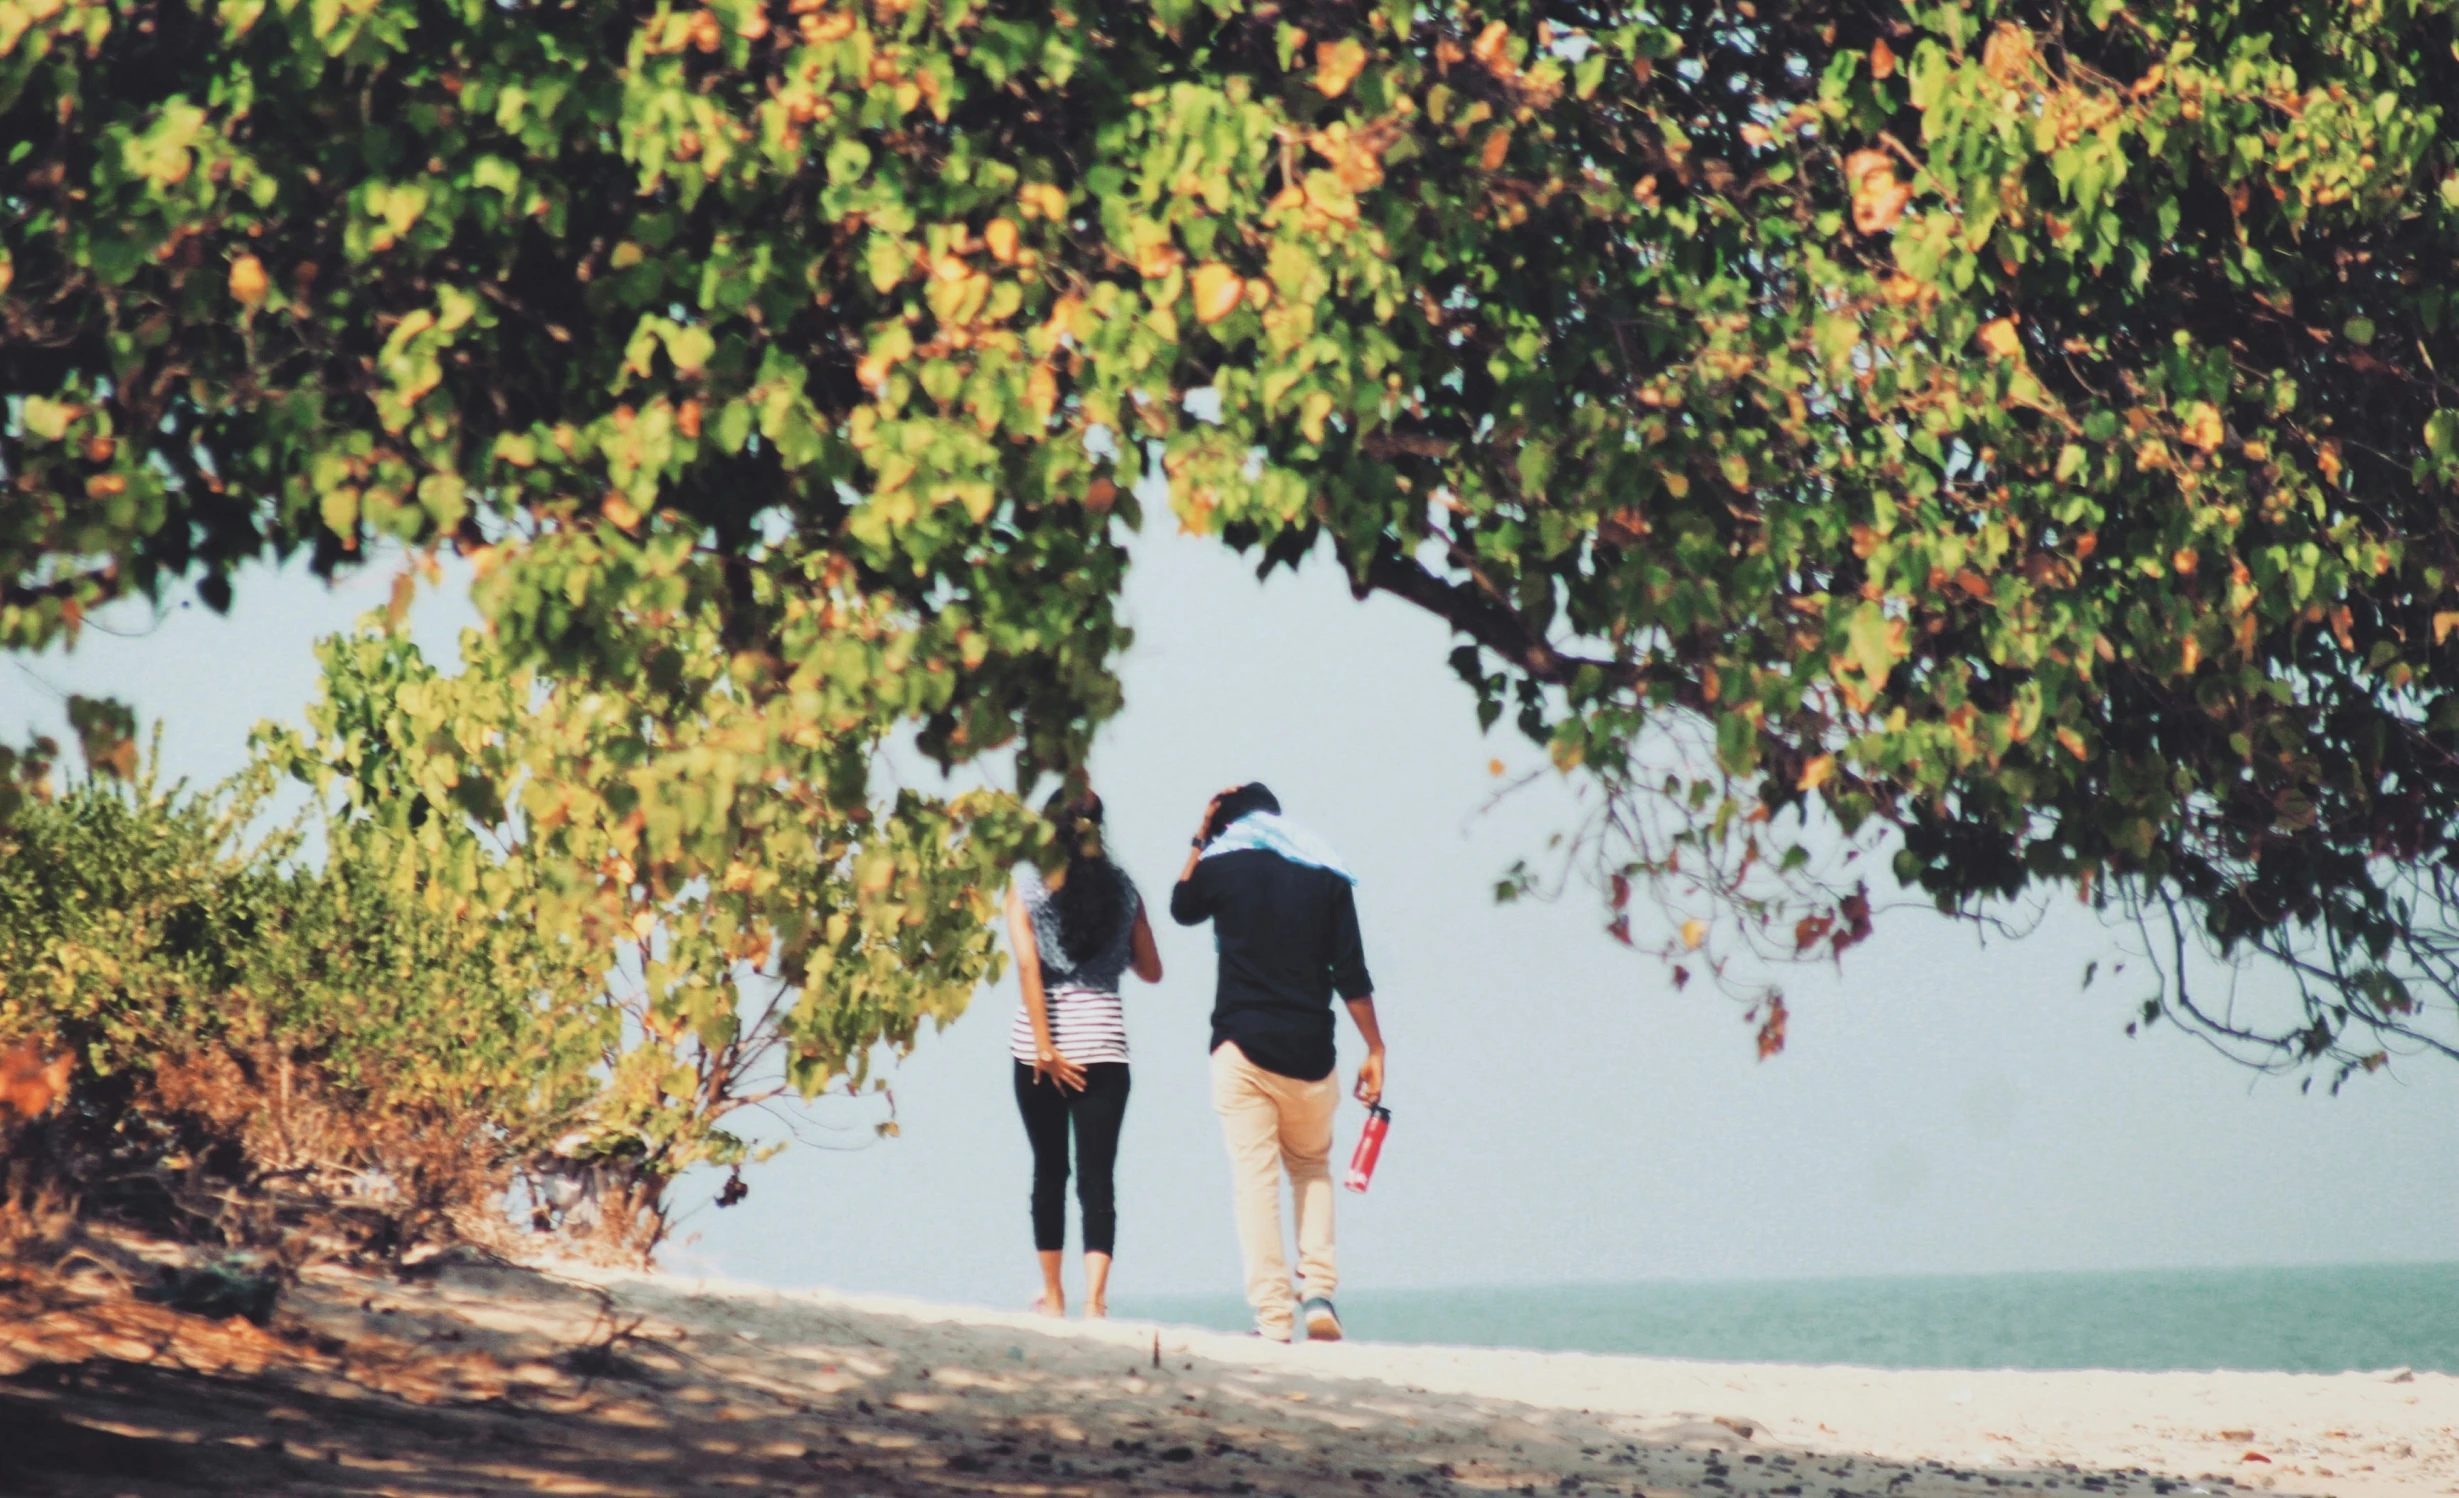 two people holding hands walk along a path along the beach